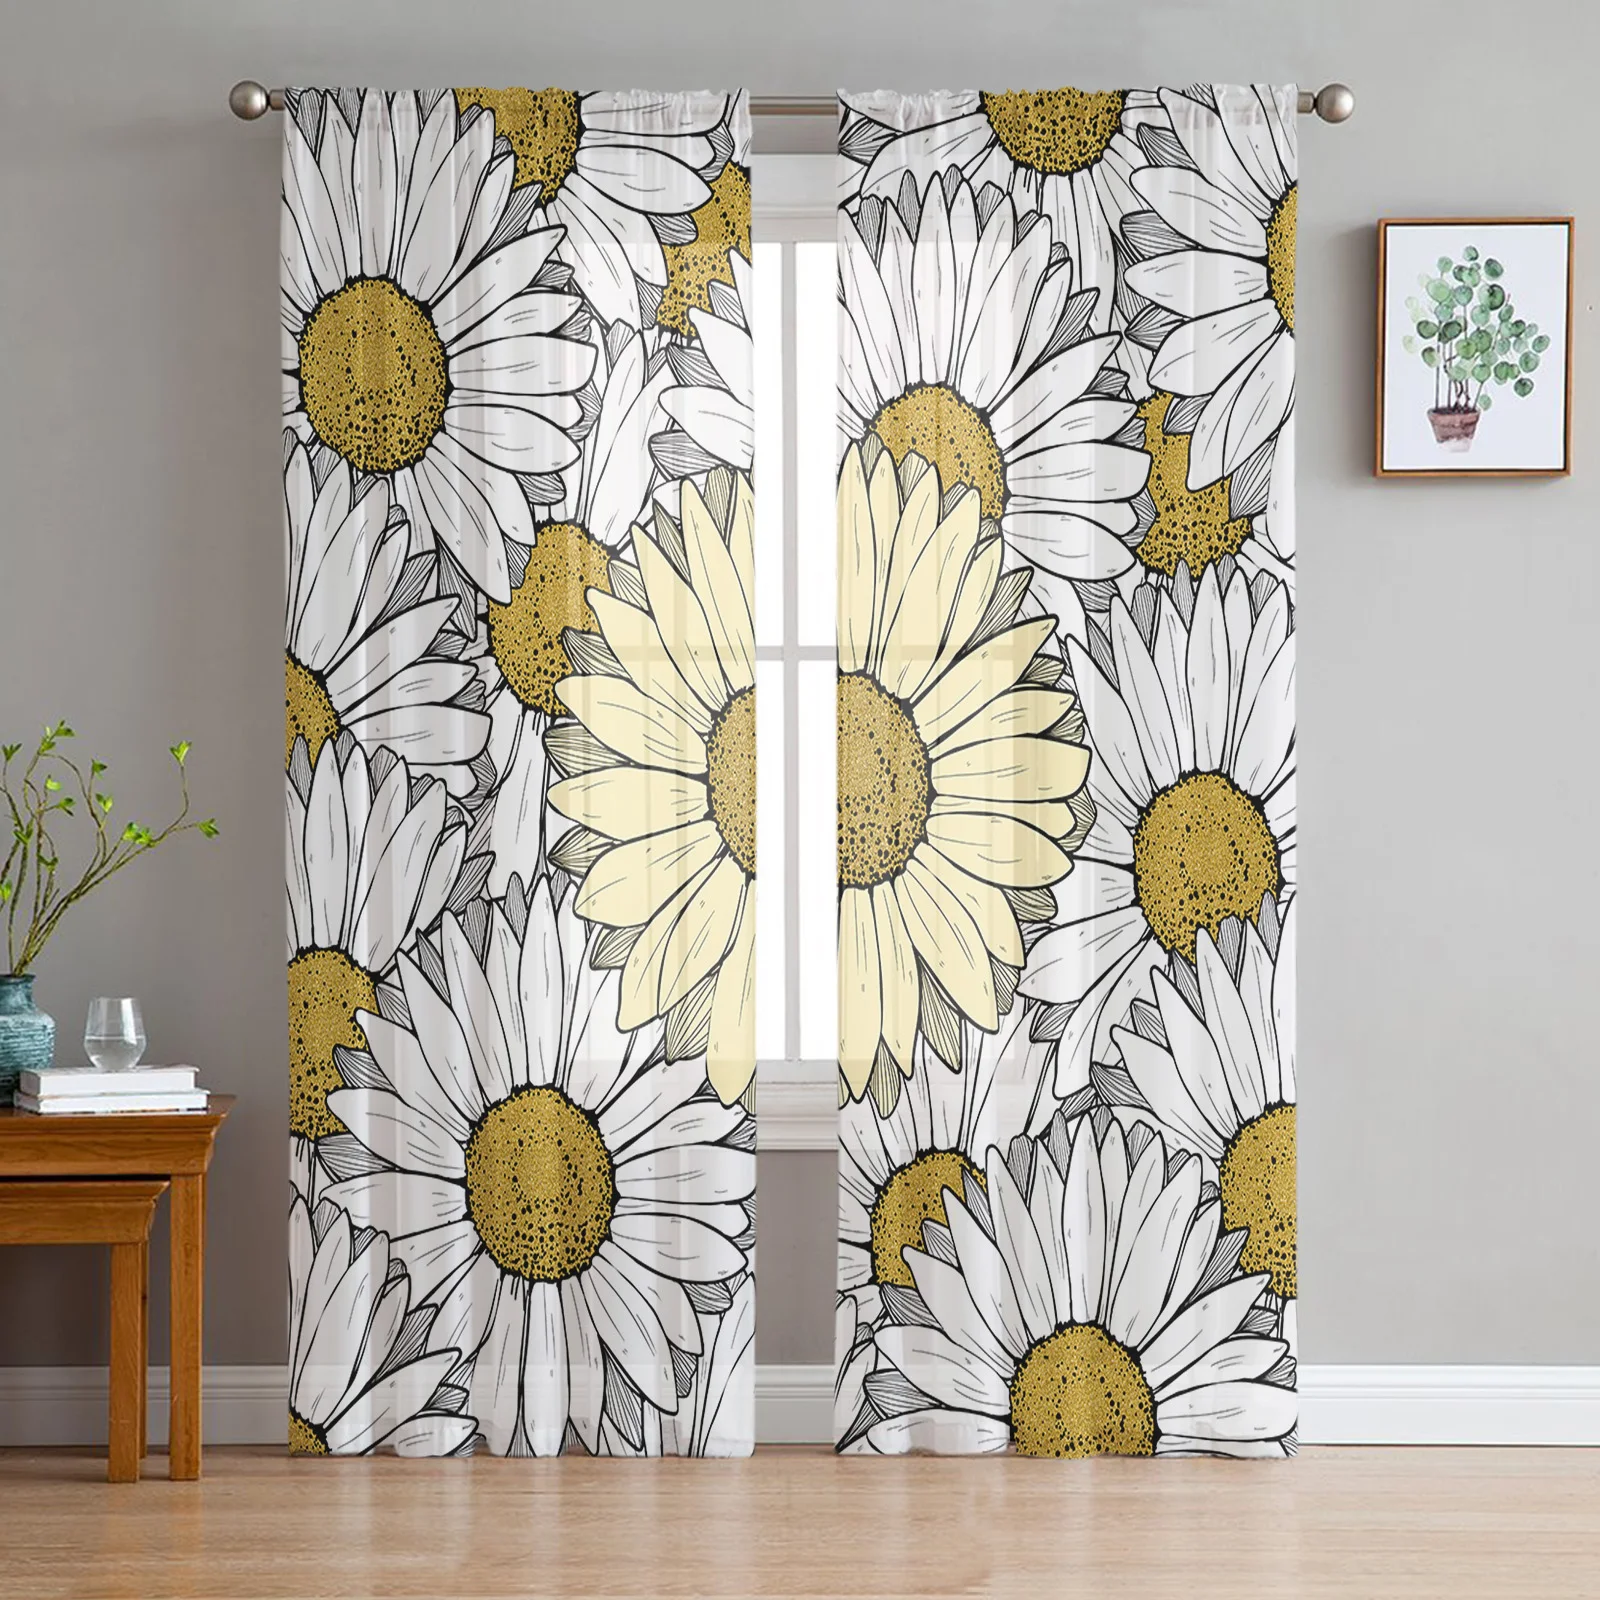 

Flowers Chrysanthemum Simple Sheer Curtains for Living Room Bedroom Tulle Curtain for Kitchen Voile Curtain Blind Panels